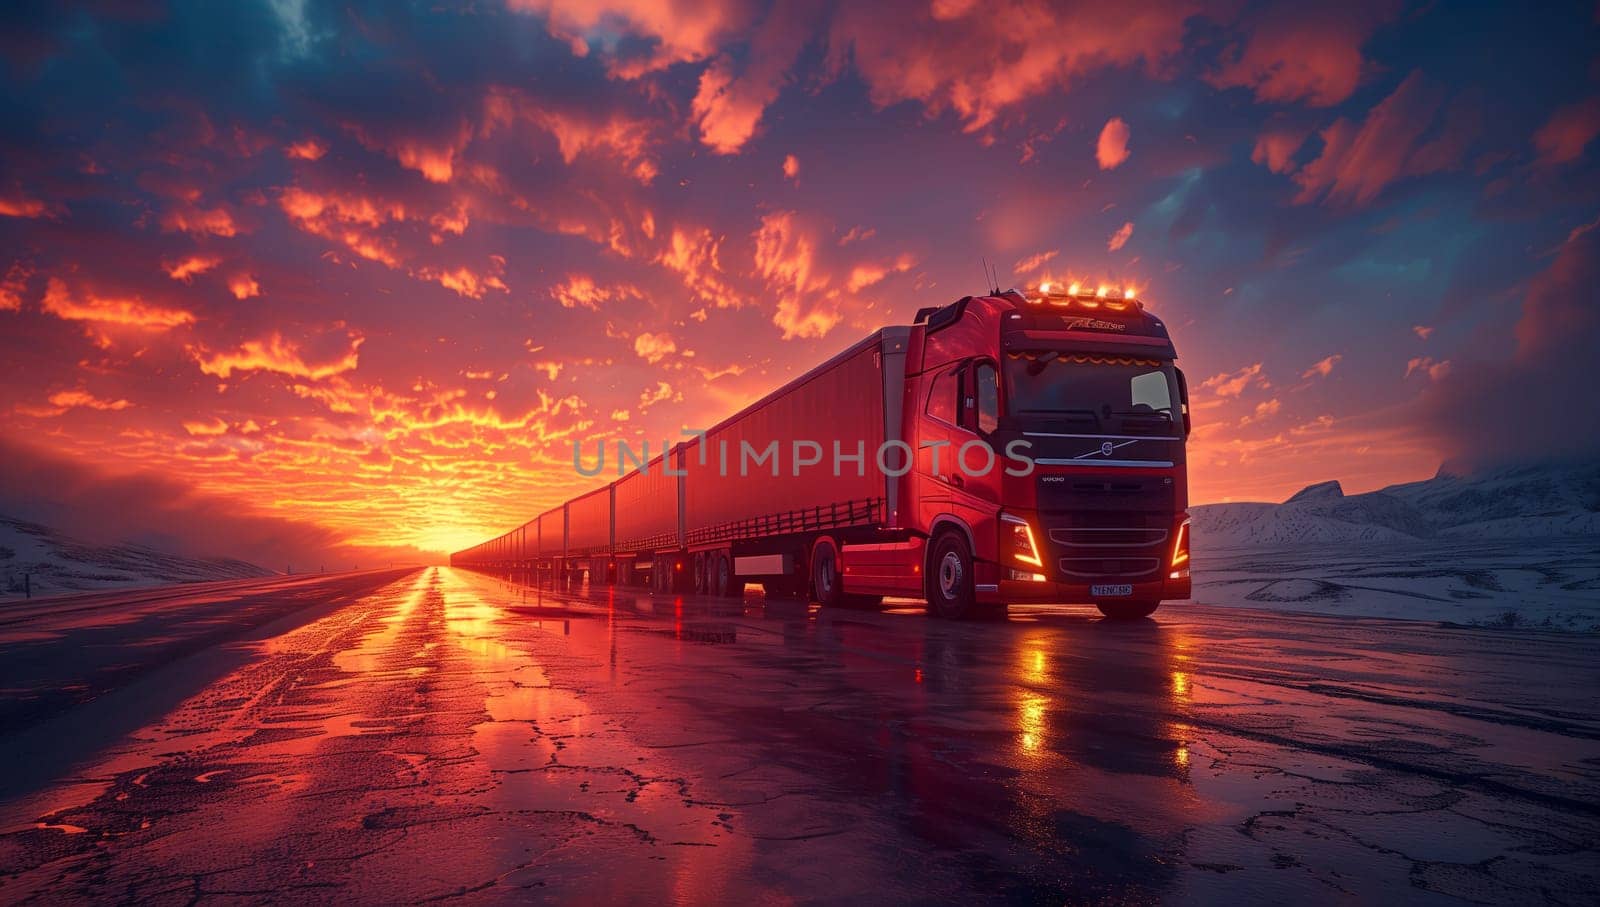 A red semi truck is traveling down a wet road under a colorful sunset sky, resembling a rolling stock on a railway journey through the landscape